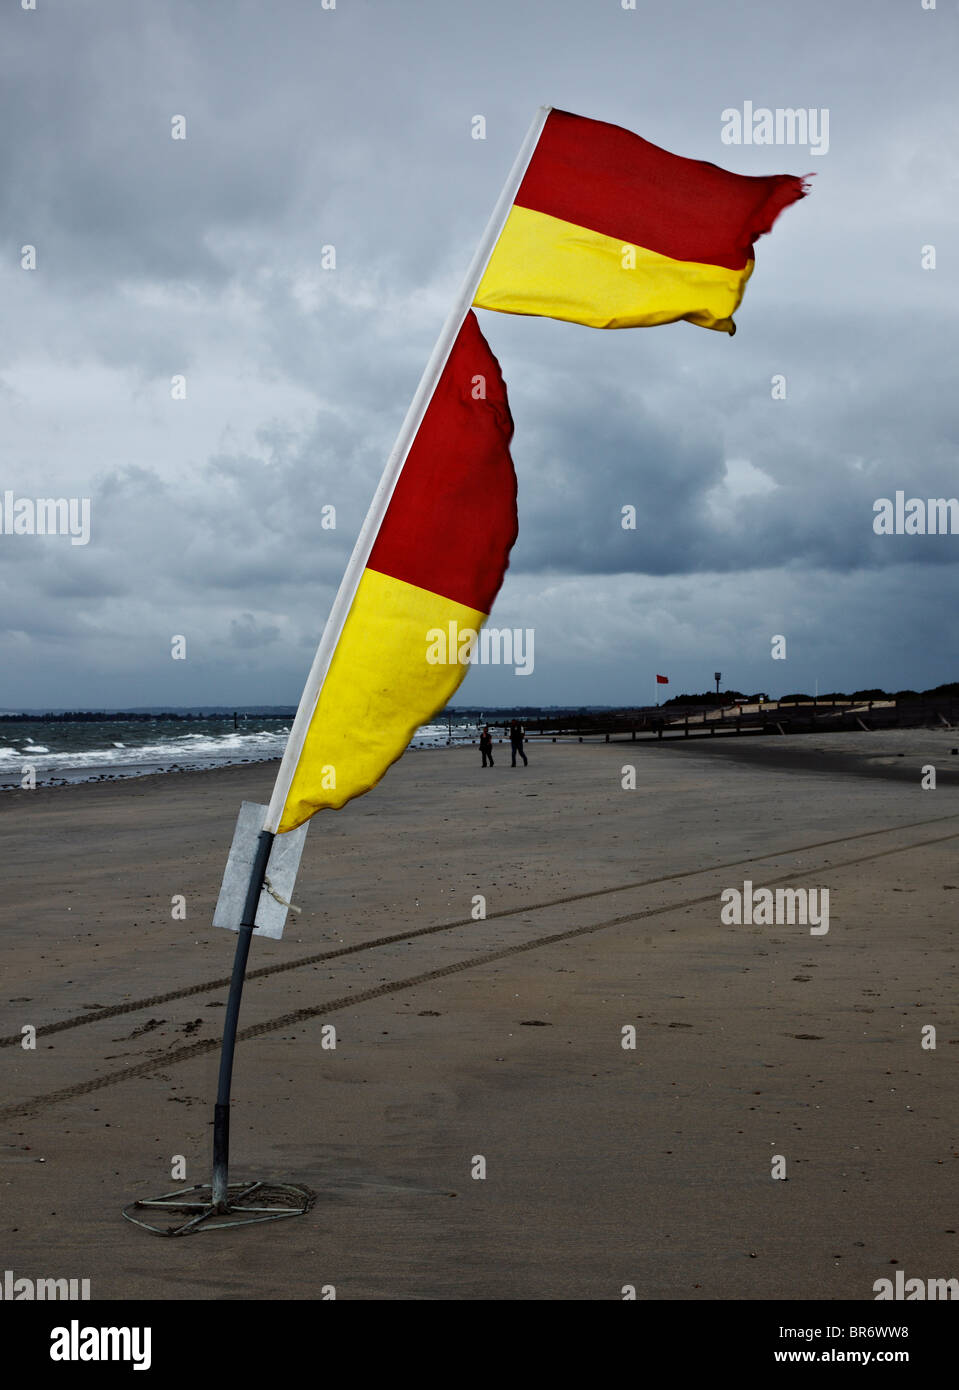 Windy beach & safety flags. Stock Photo